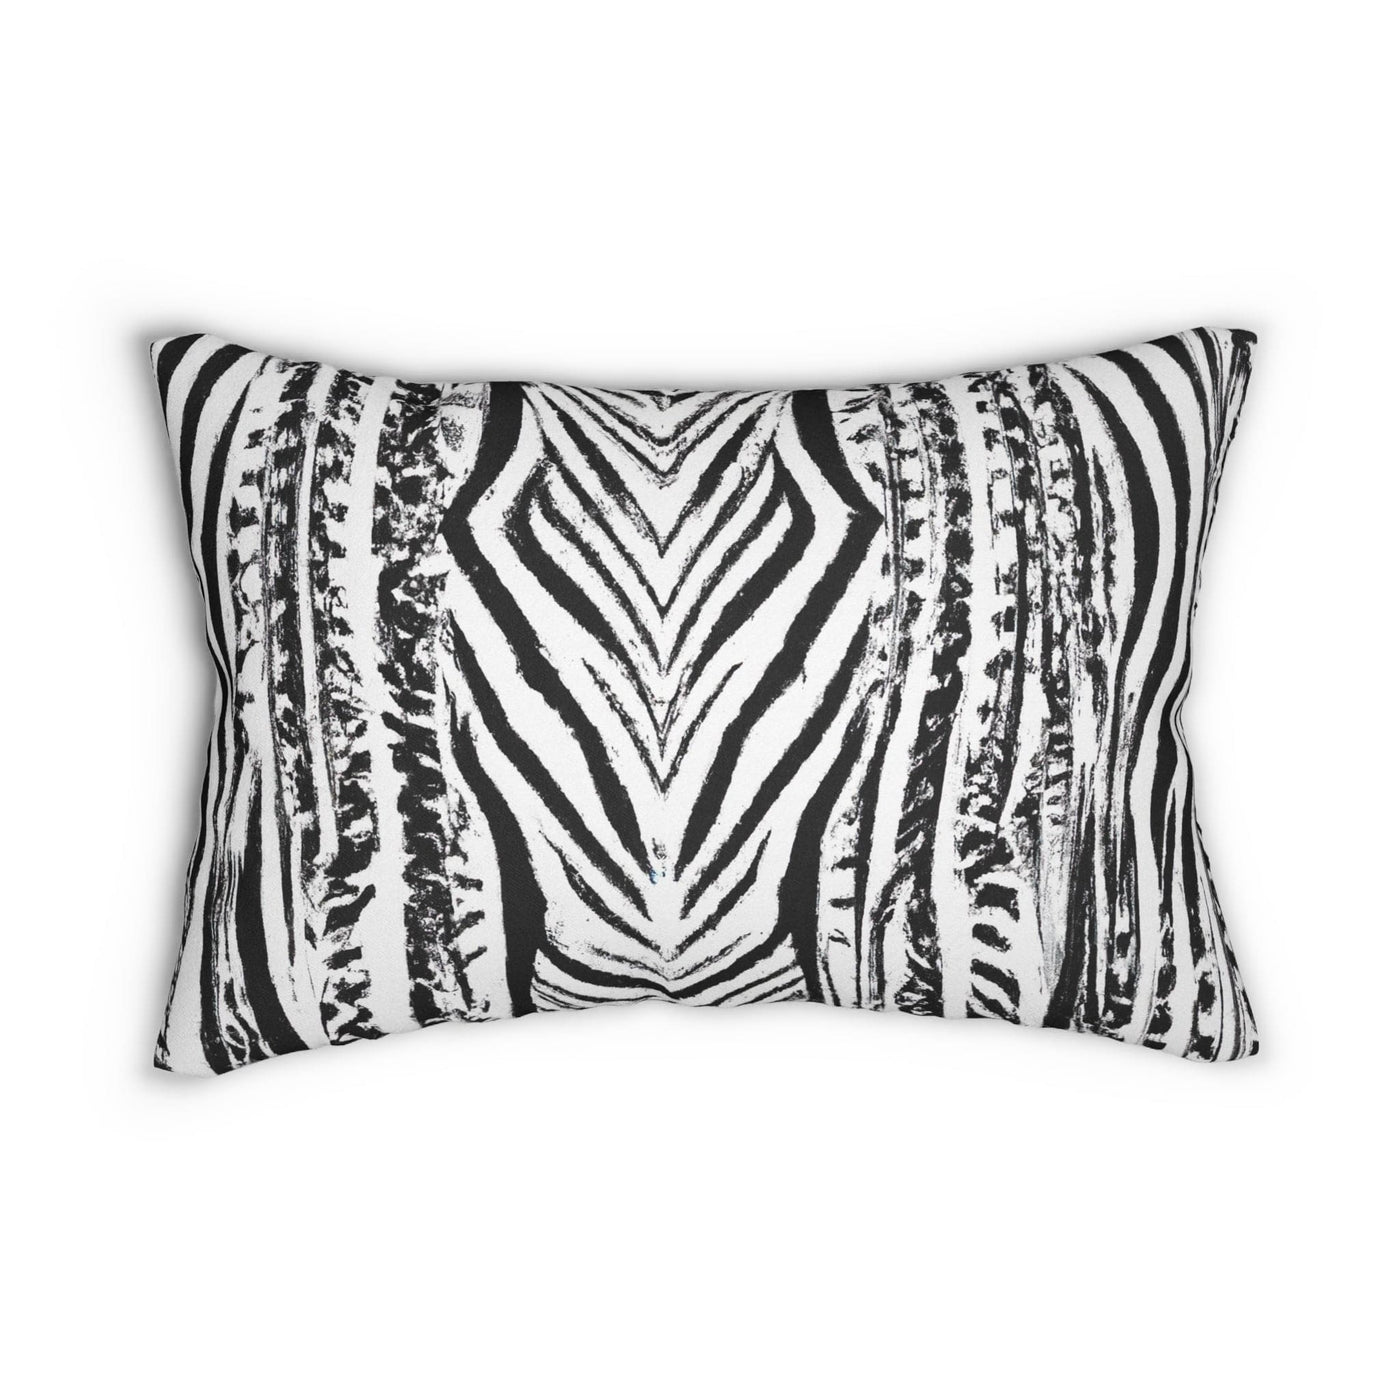 Decorative Lumbar Throw Pillow - Native Black And White Abstract Pattern - Home